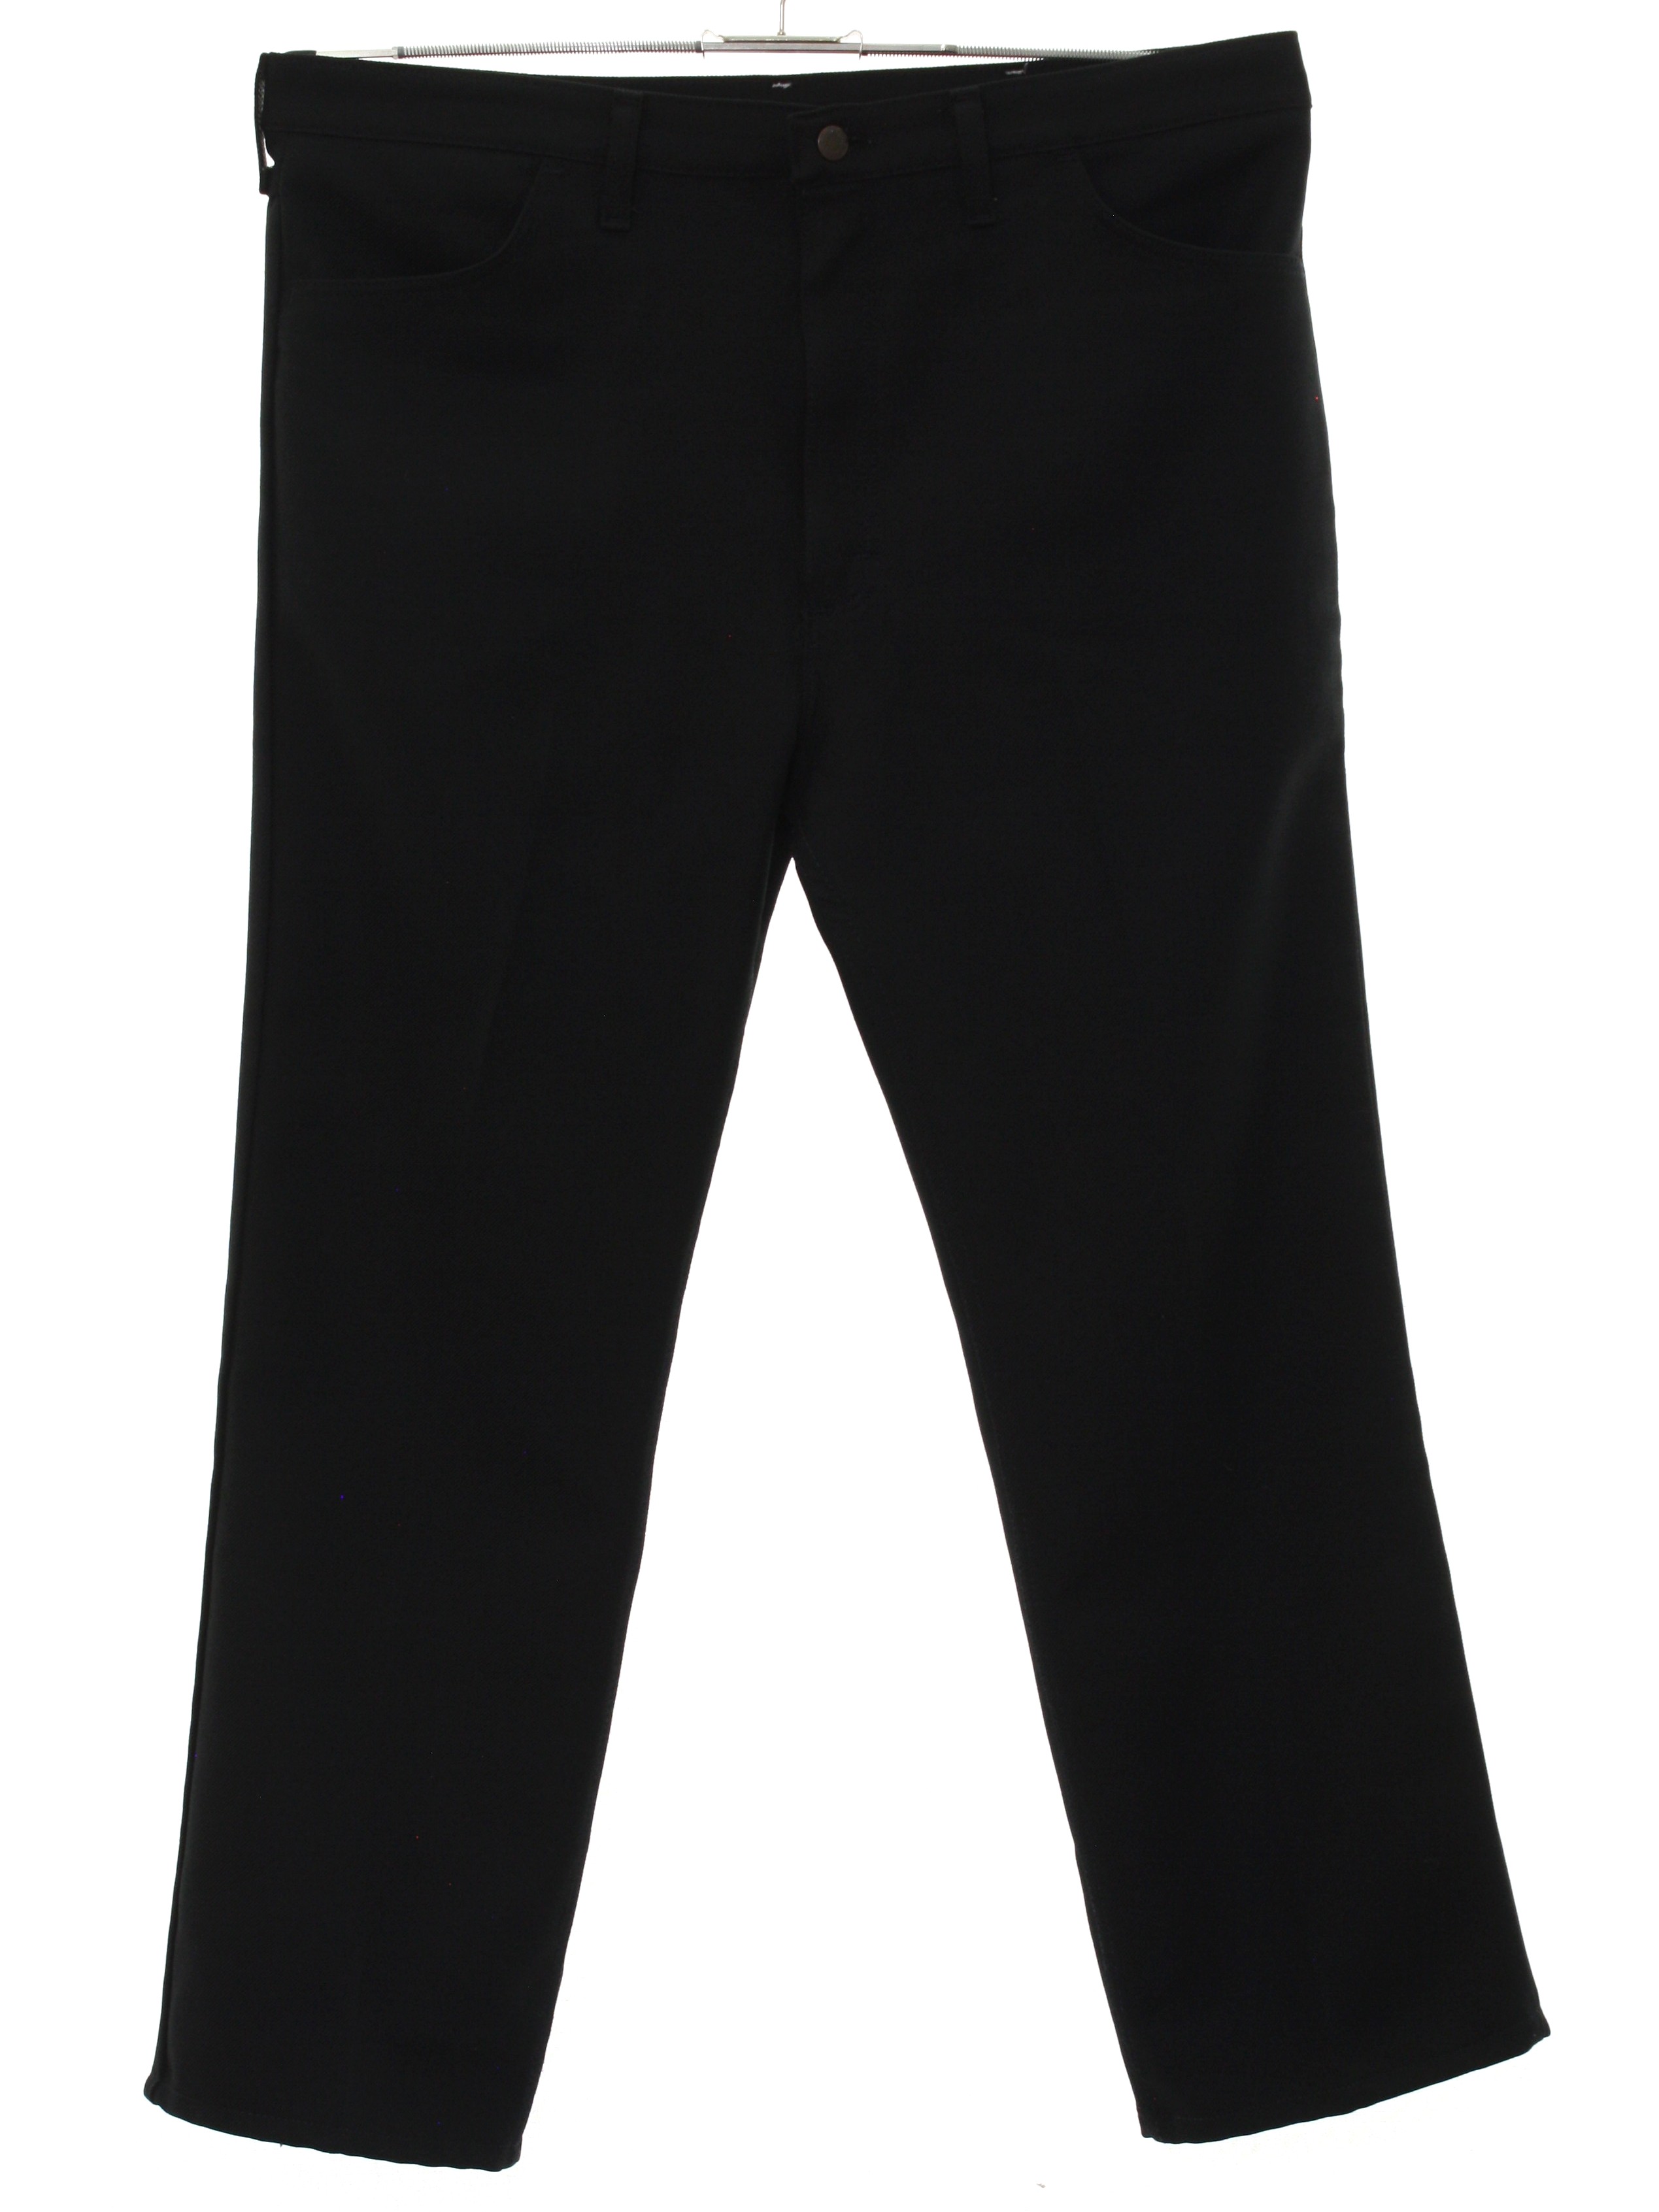 1980's Retro Pants: 80s -Wrangler- Mens black solid colored polyester ...